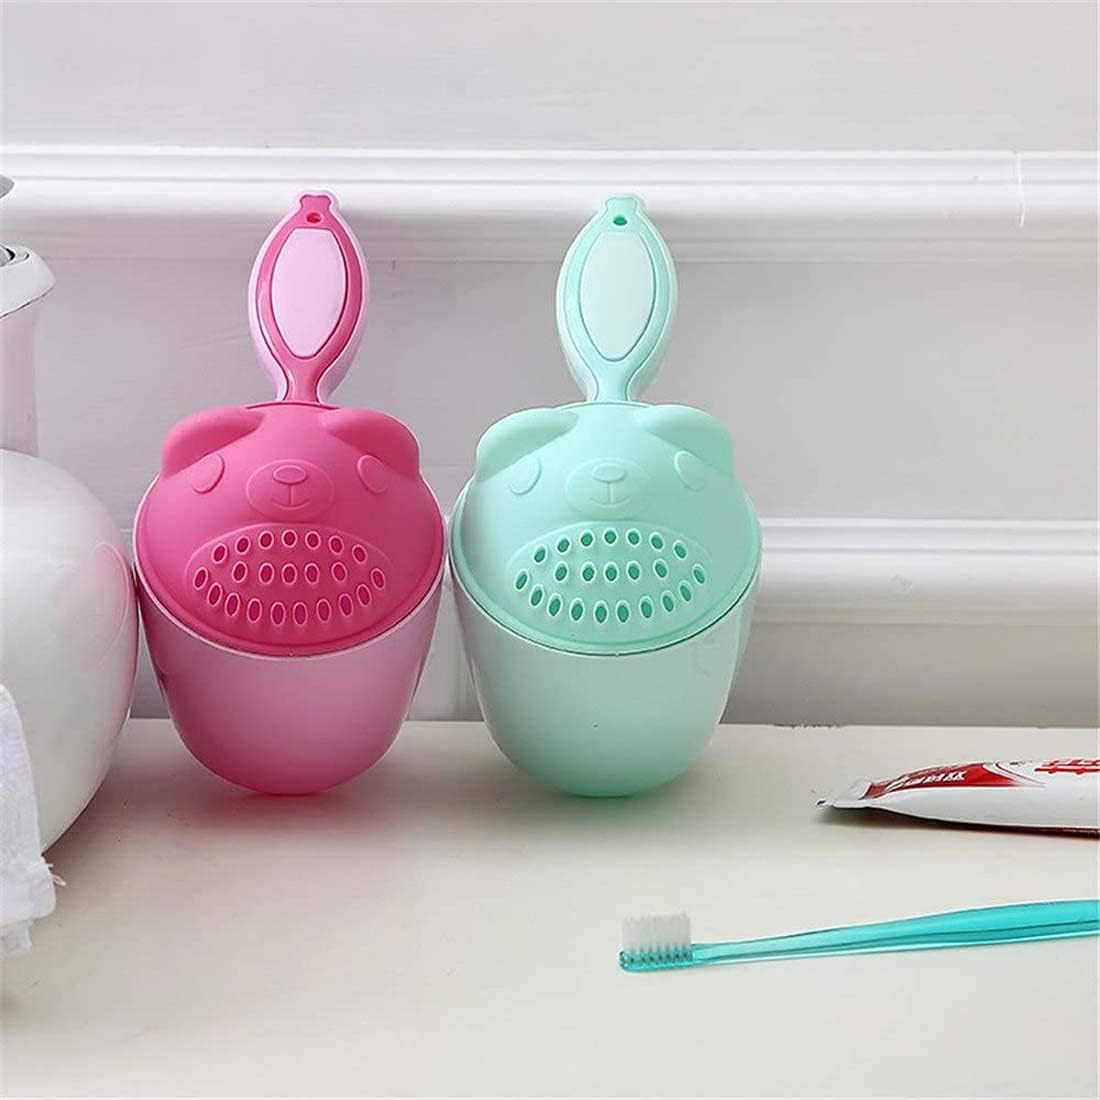 Chefkit Baby Dippers Bath Rinse Cup Shampoo Rinser Shower Sprinkler Spoon Bathroom Accessories for Baby Tub Wash Cups Shampoo Rinser with Handle (2PCS)